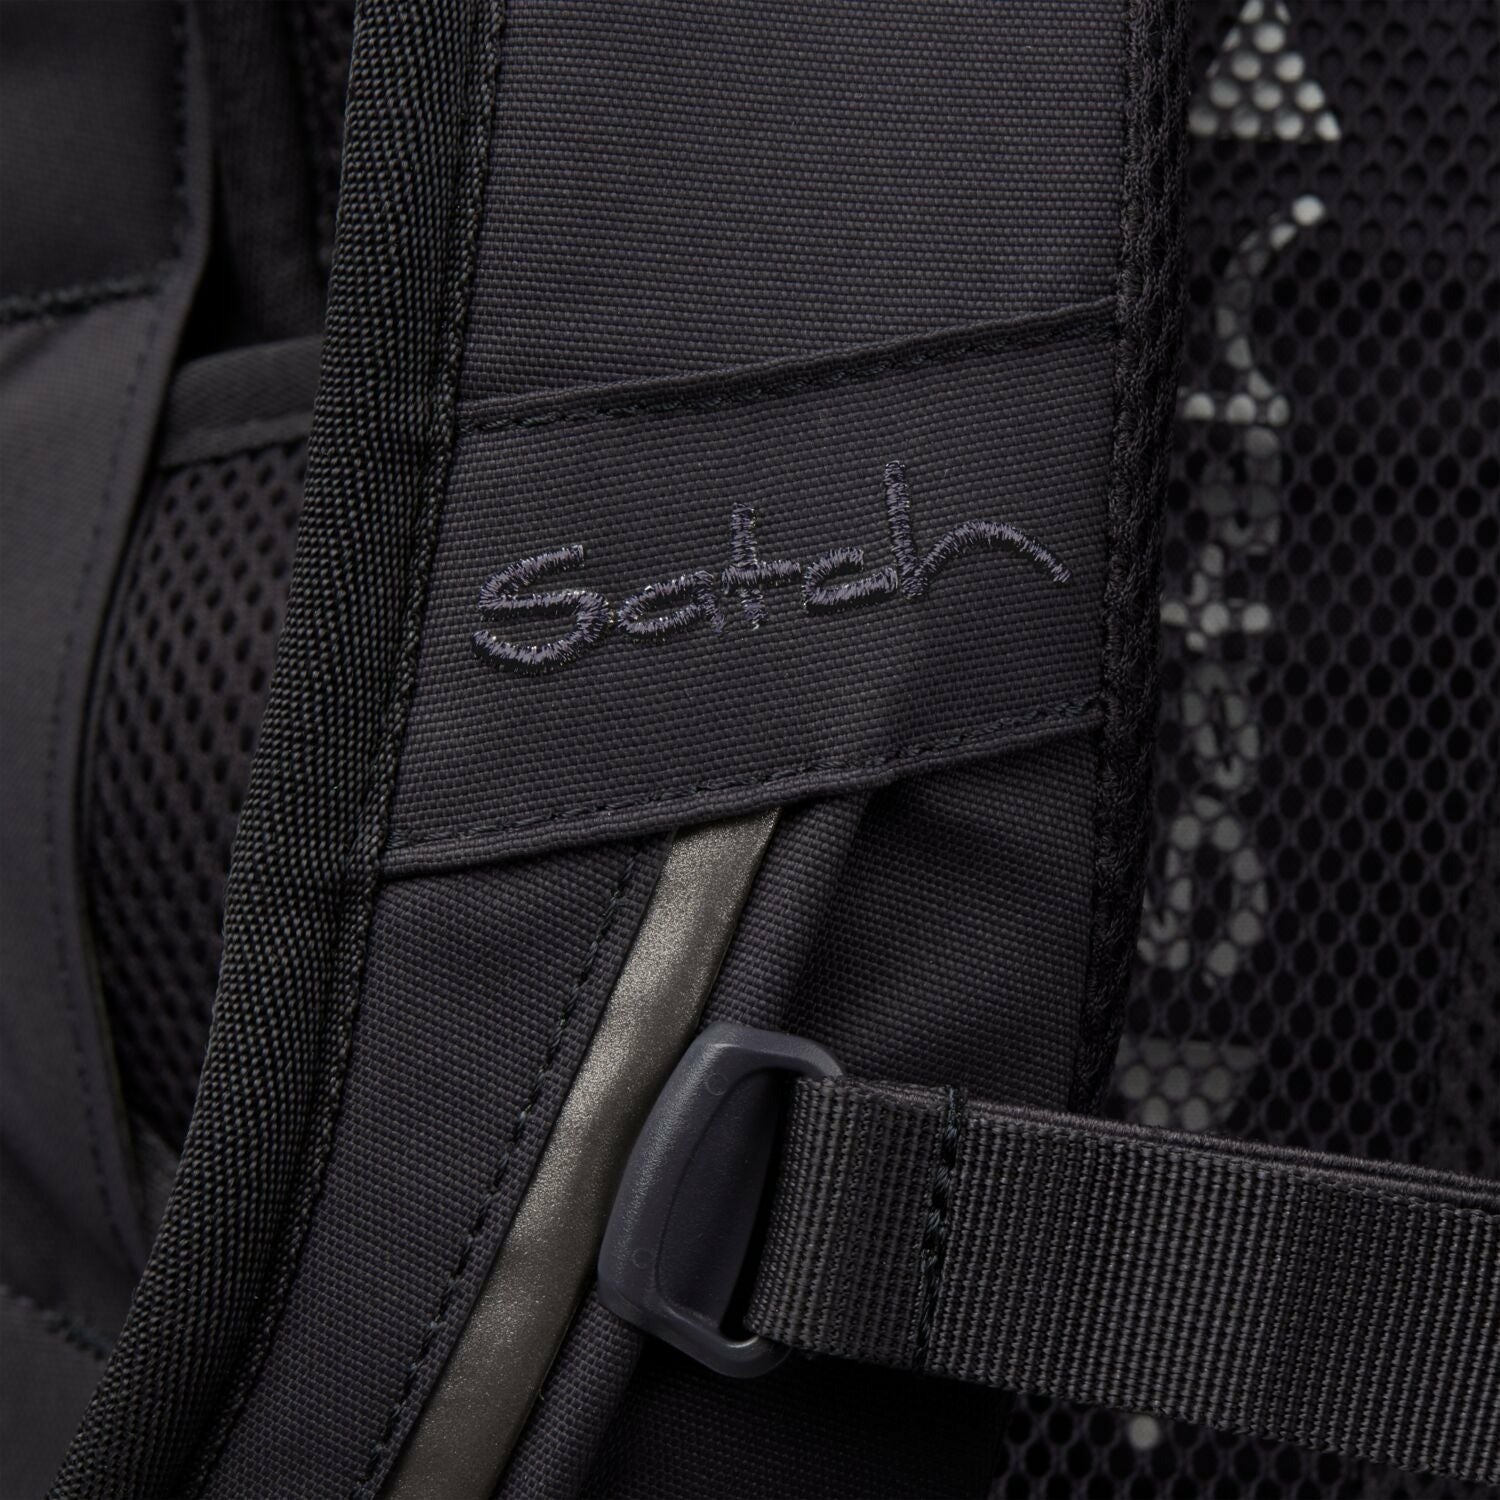 satch | satch pack | Nordic Grey